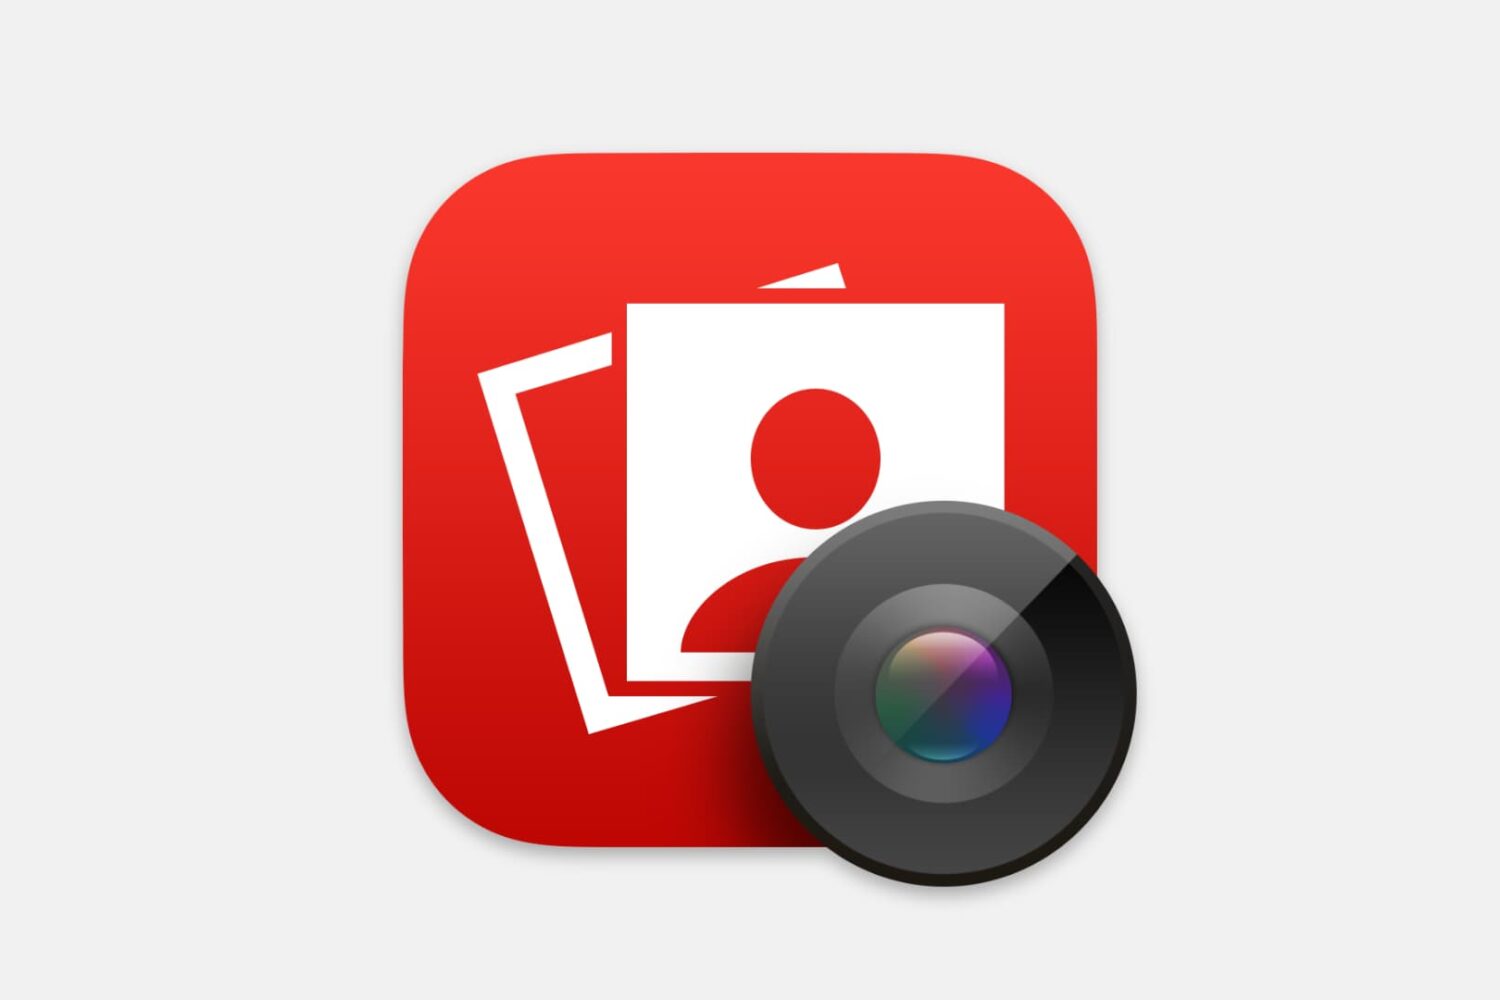 Mac's Photo Booth app icon